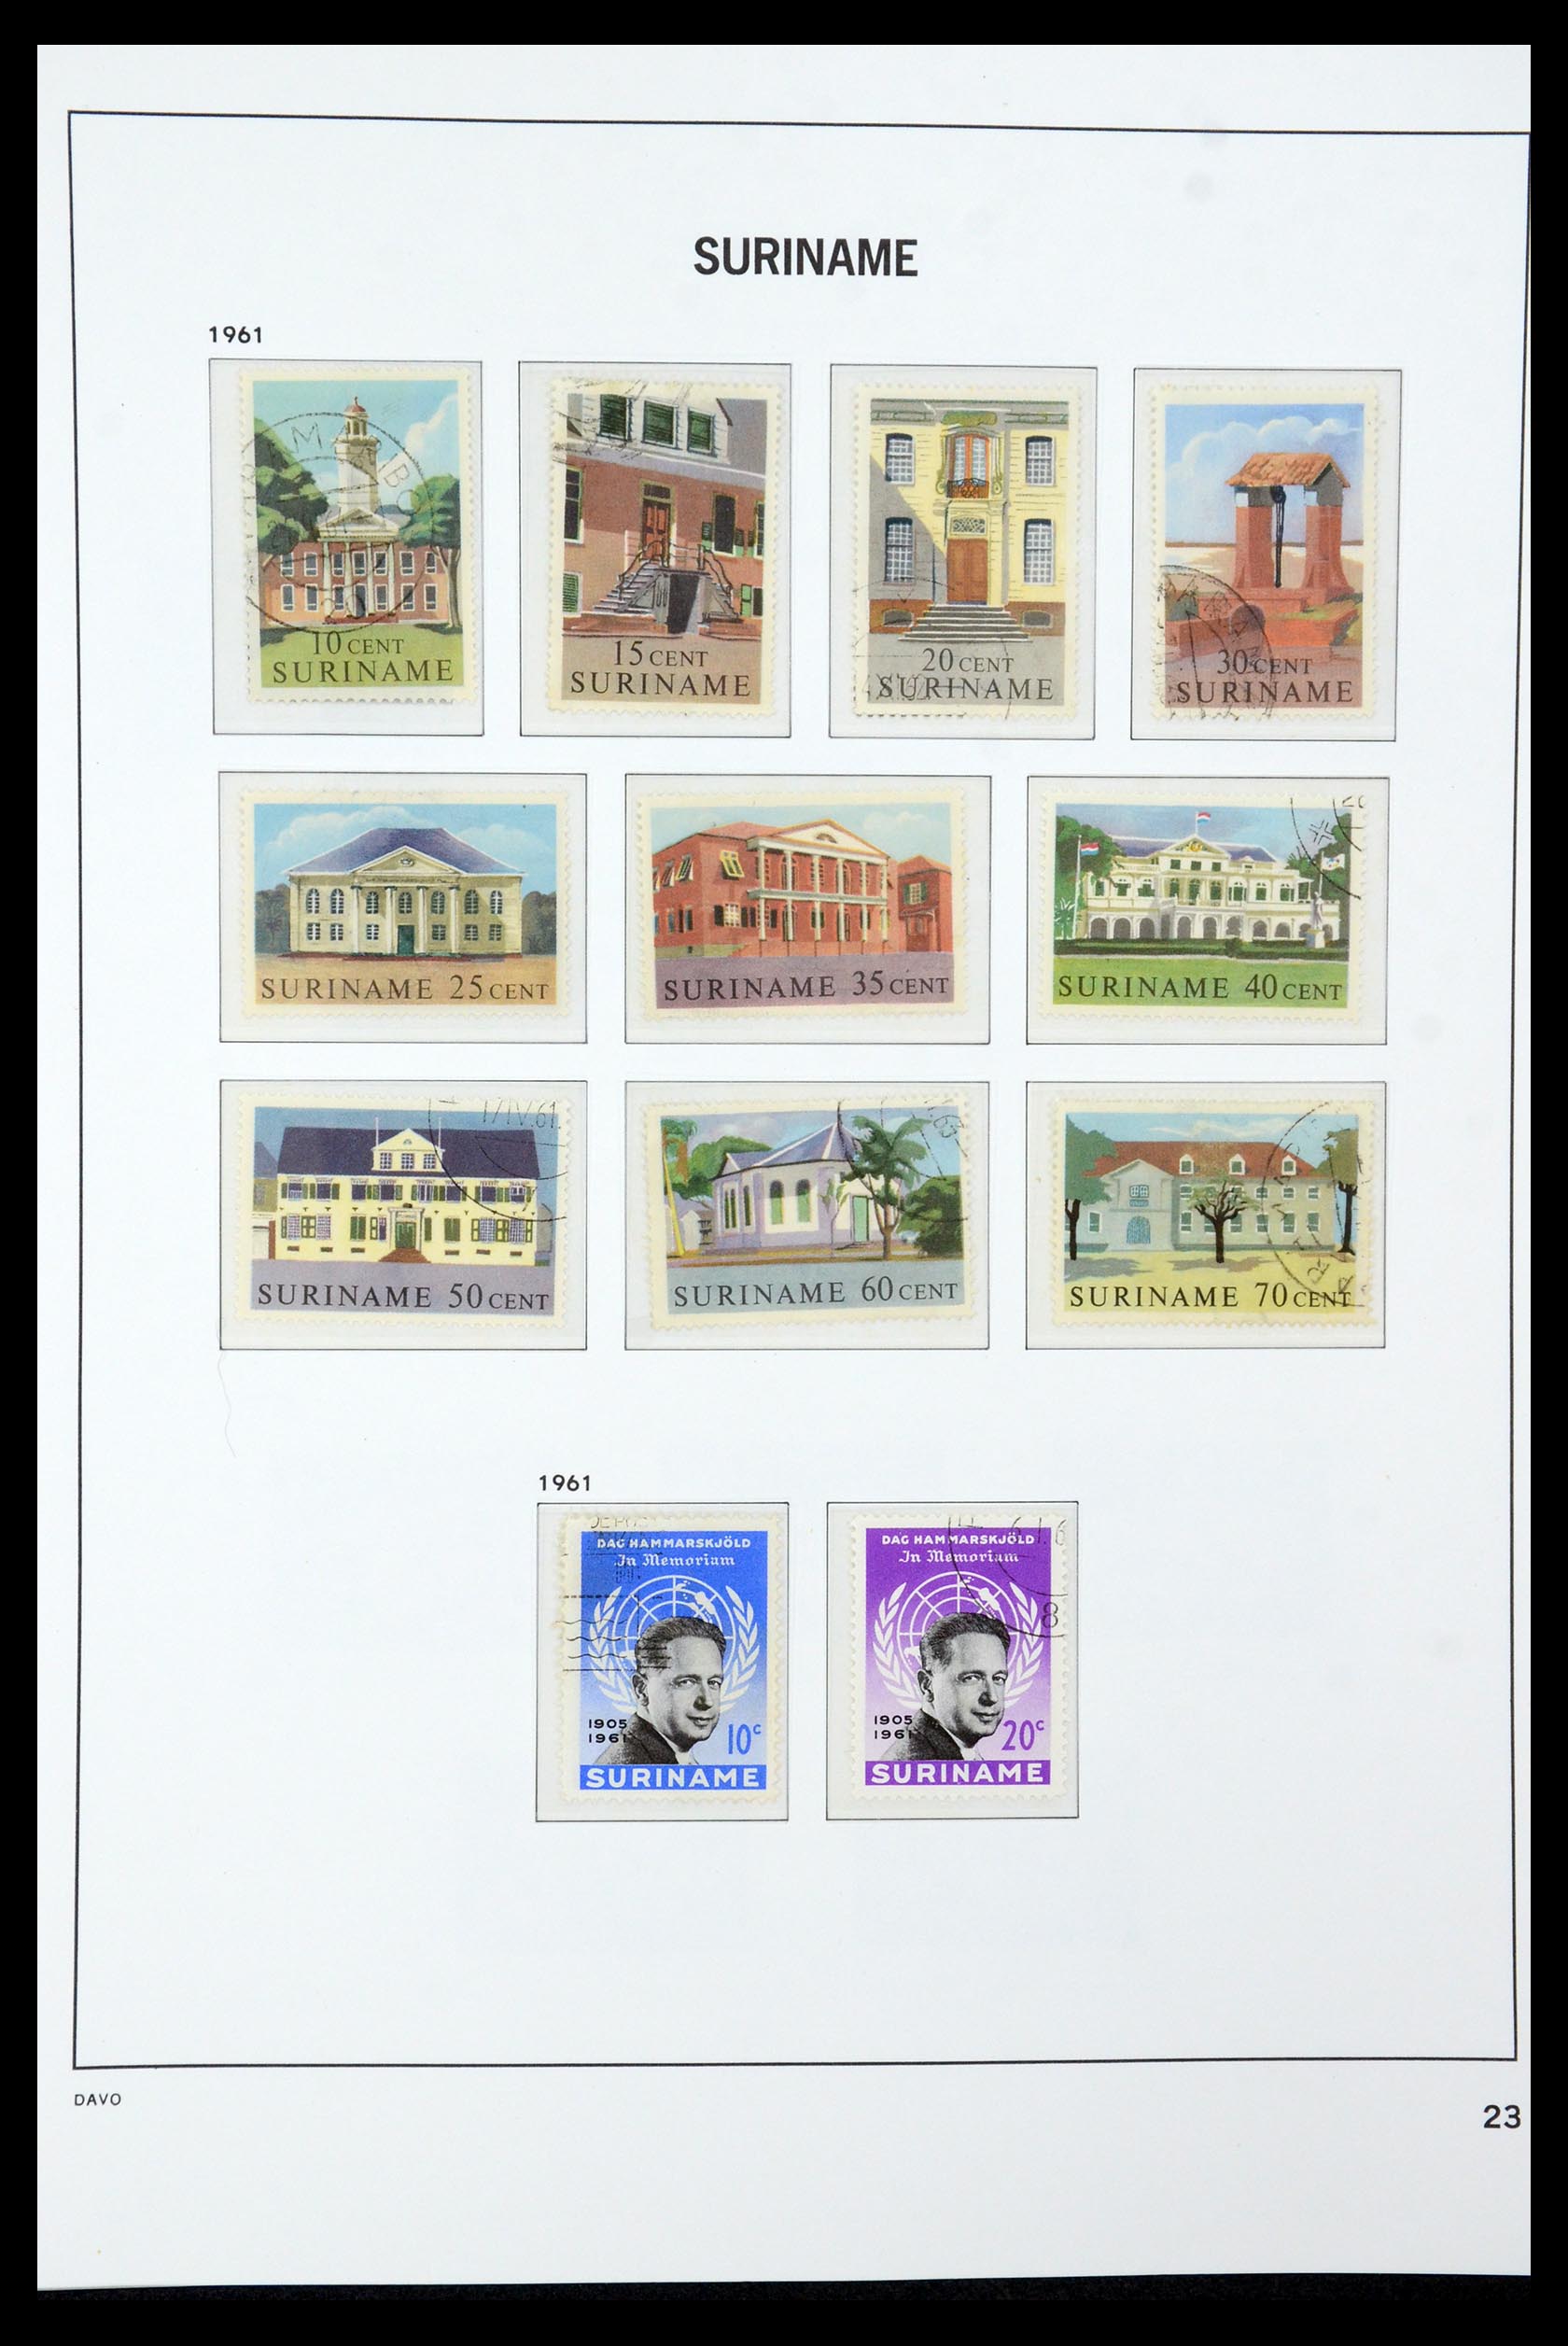 36422 022 - Stamp collection 36422 Suriname 1873-1975.